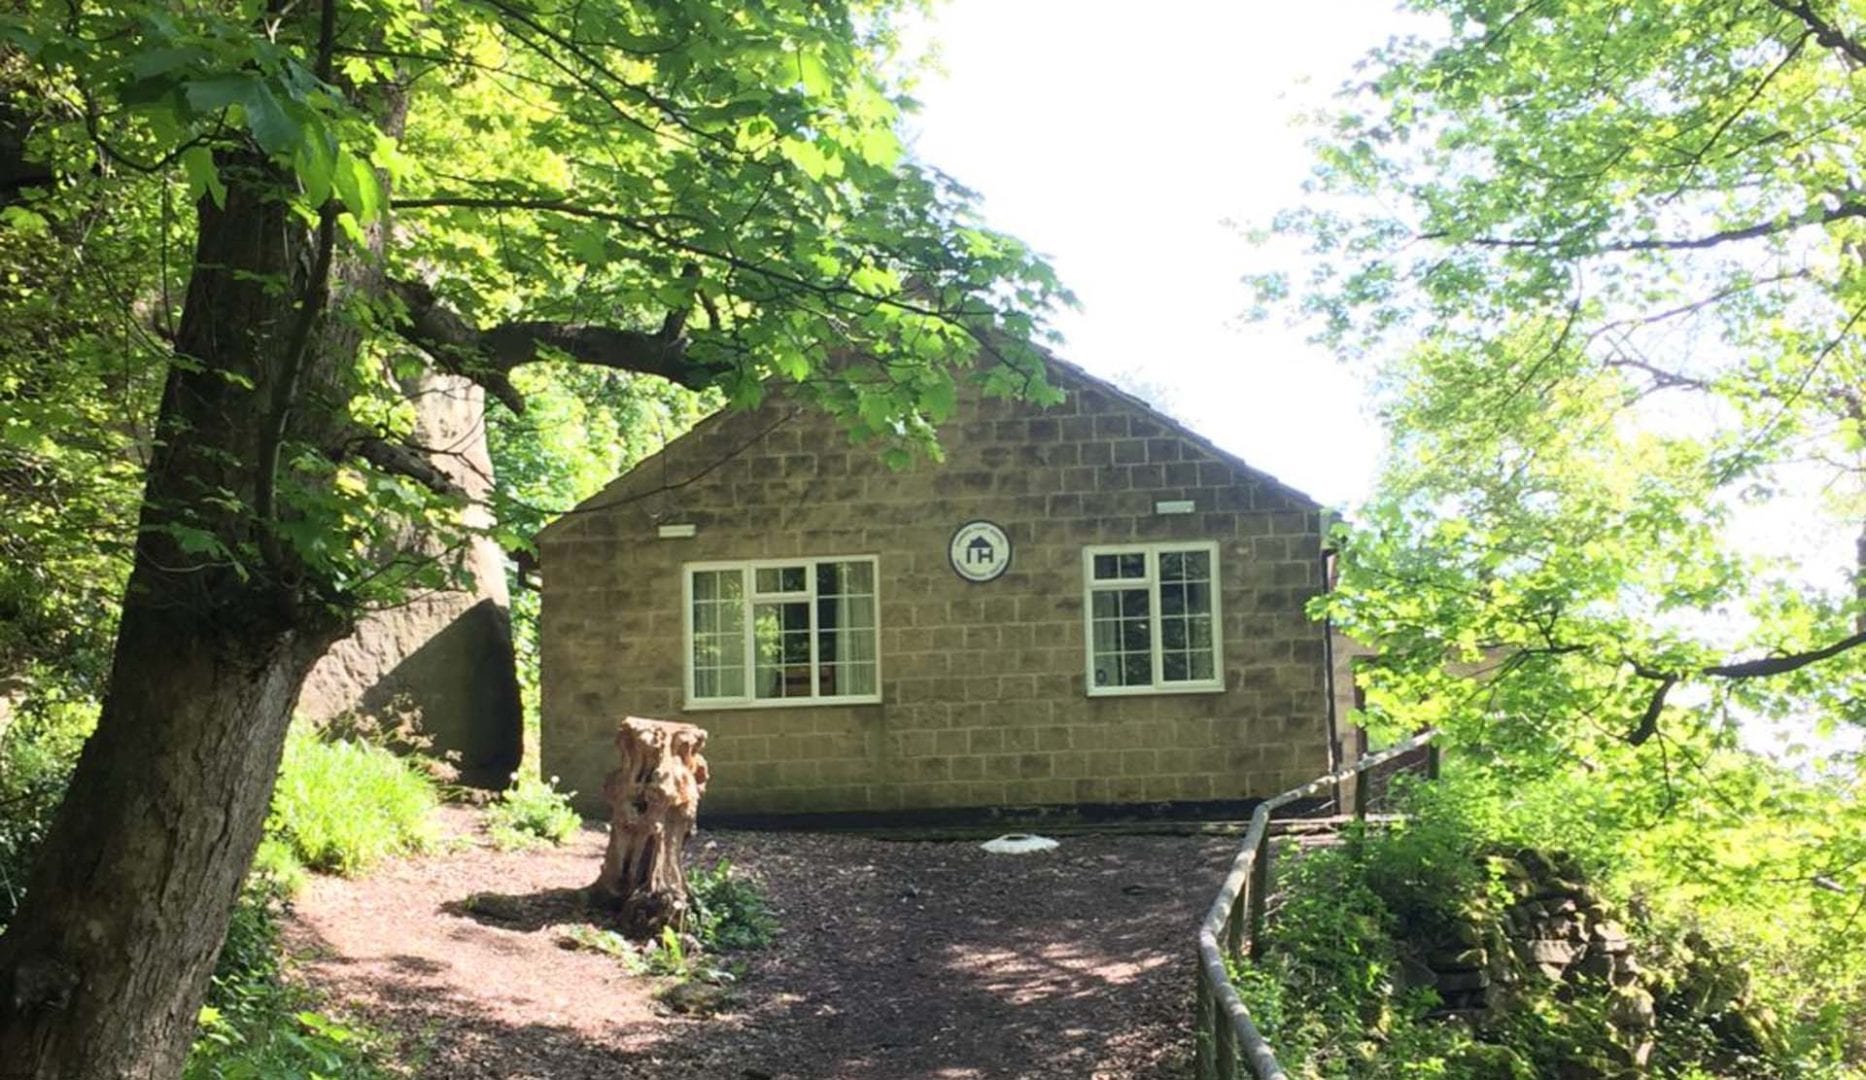 Celebrate Christmas at Shining Cliff Hostel in Derbyshire